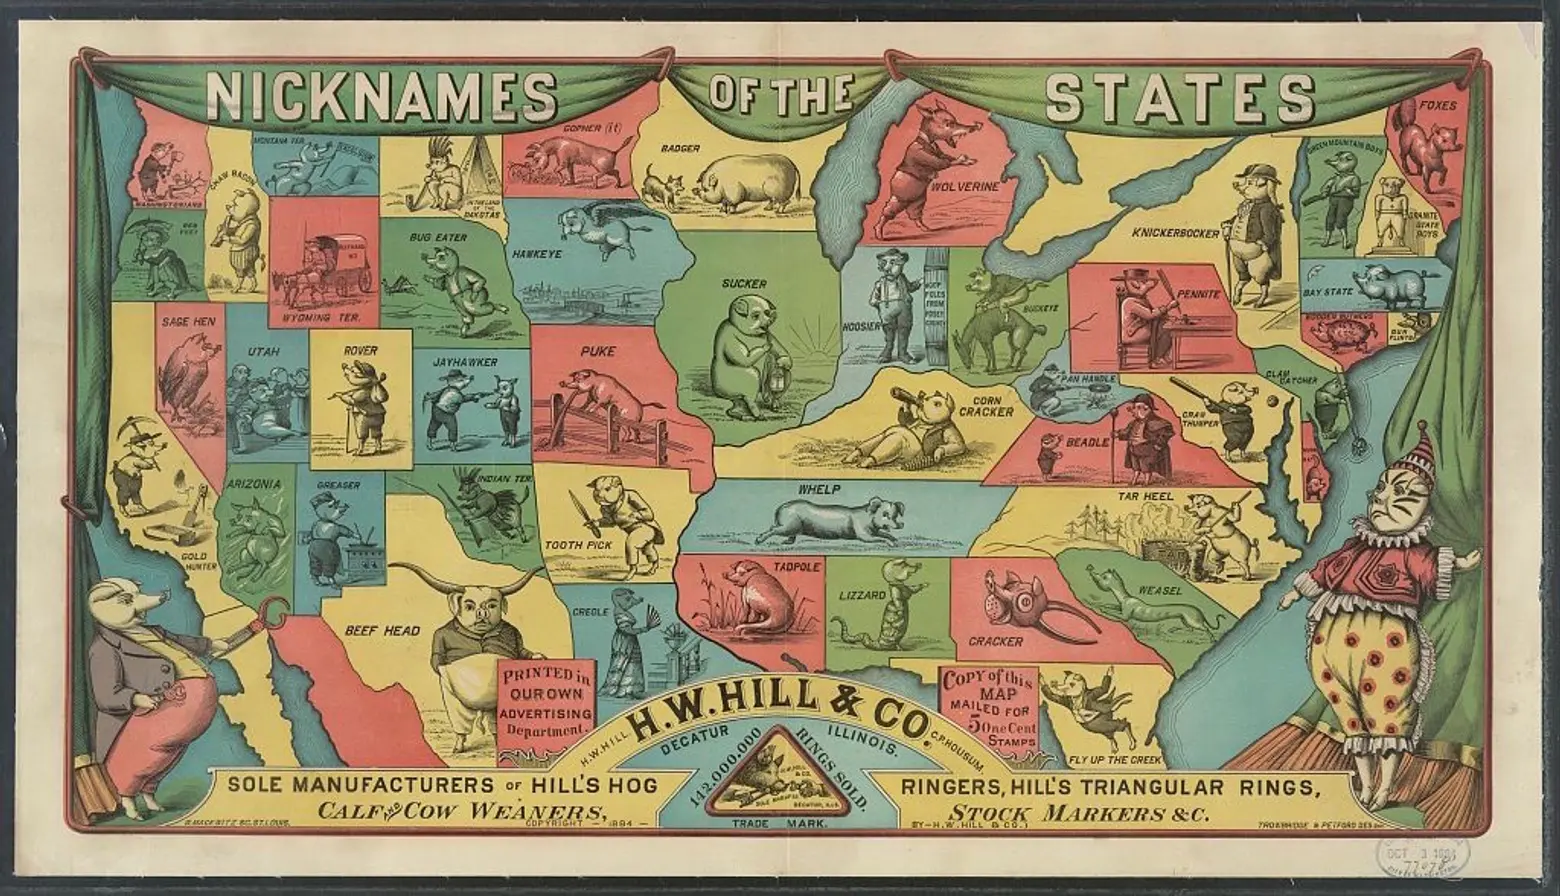 No state is spared a roasting in this 19th-century nickname map